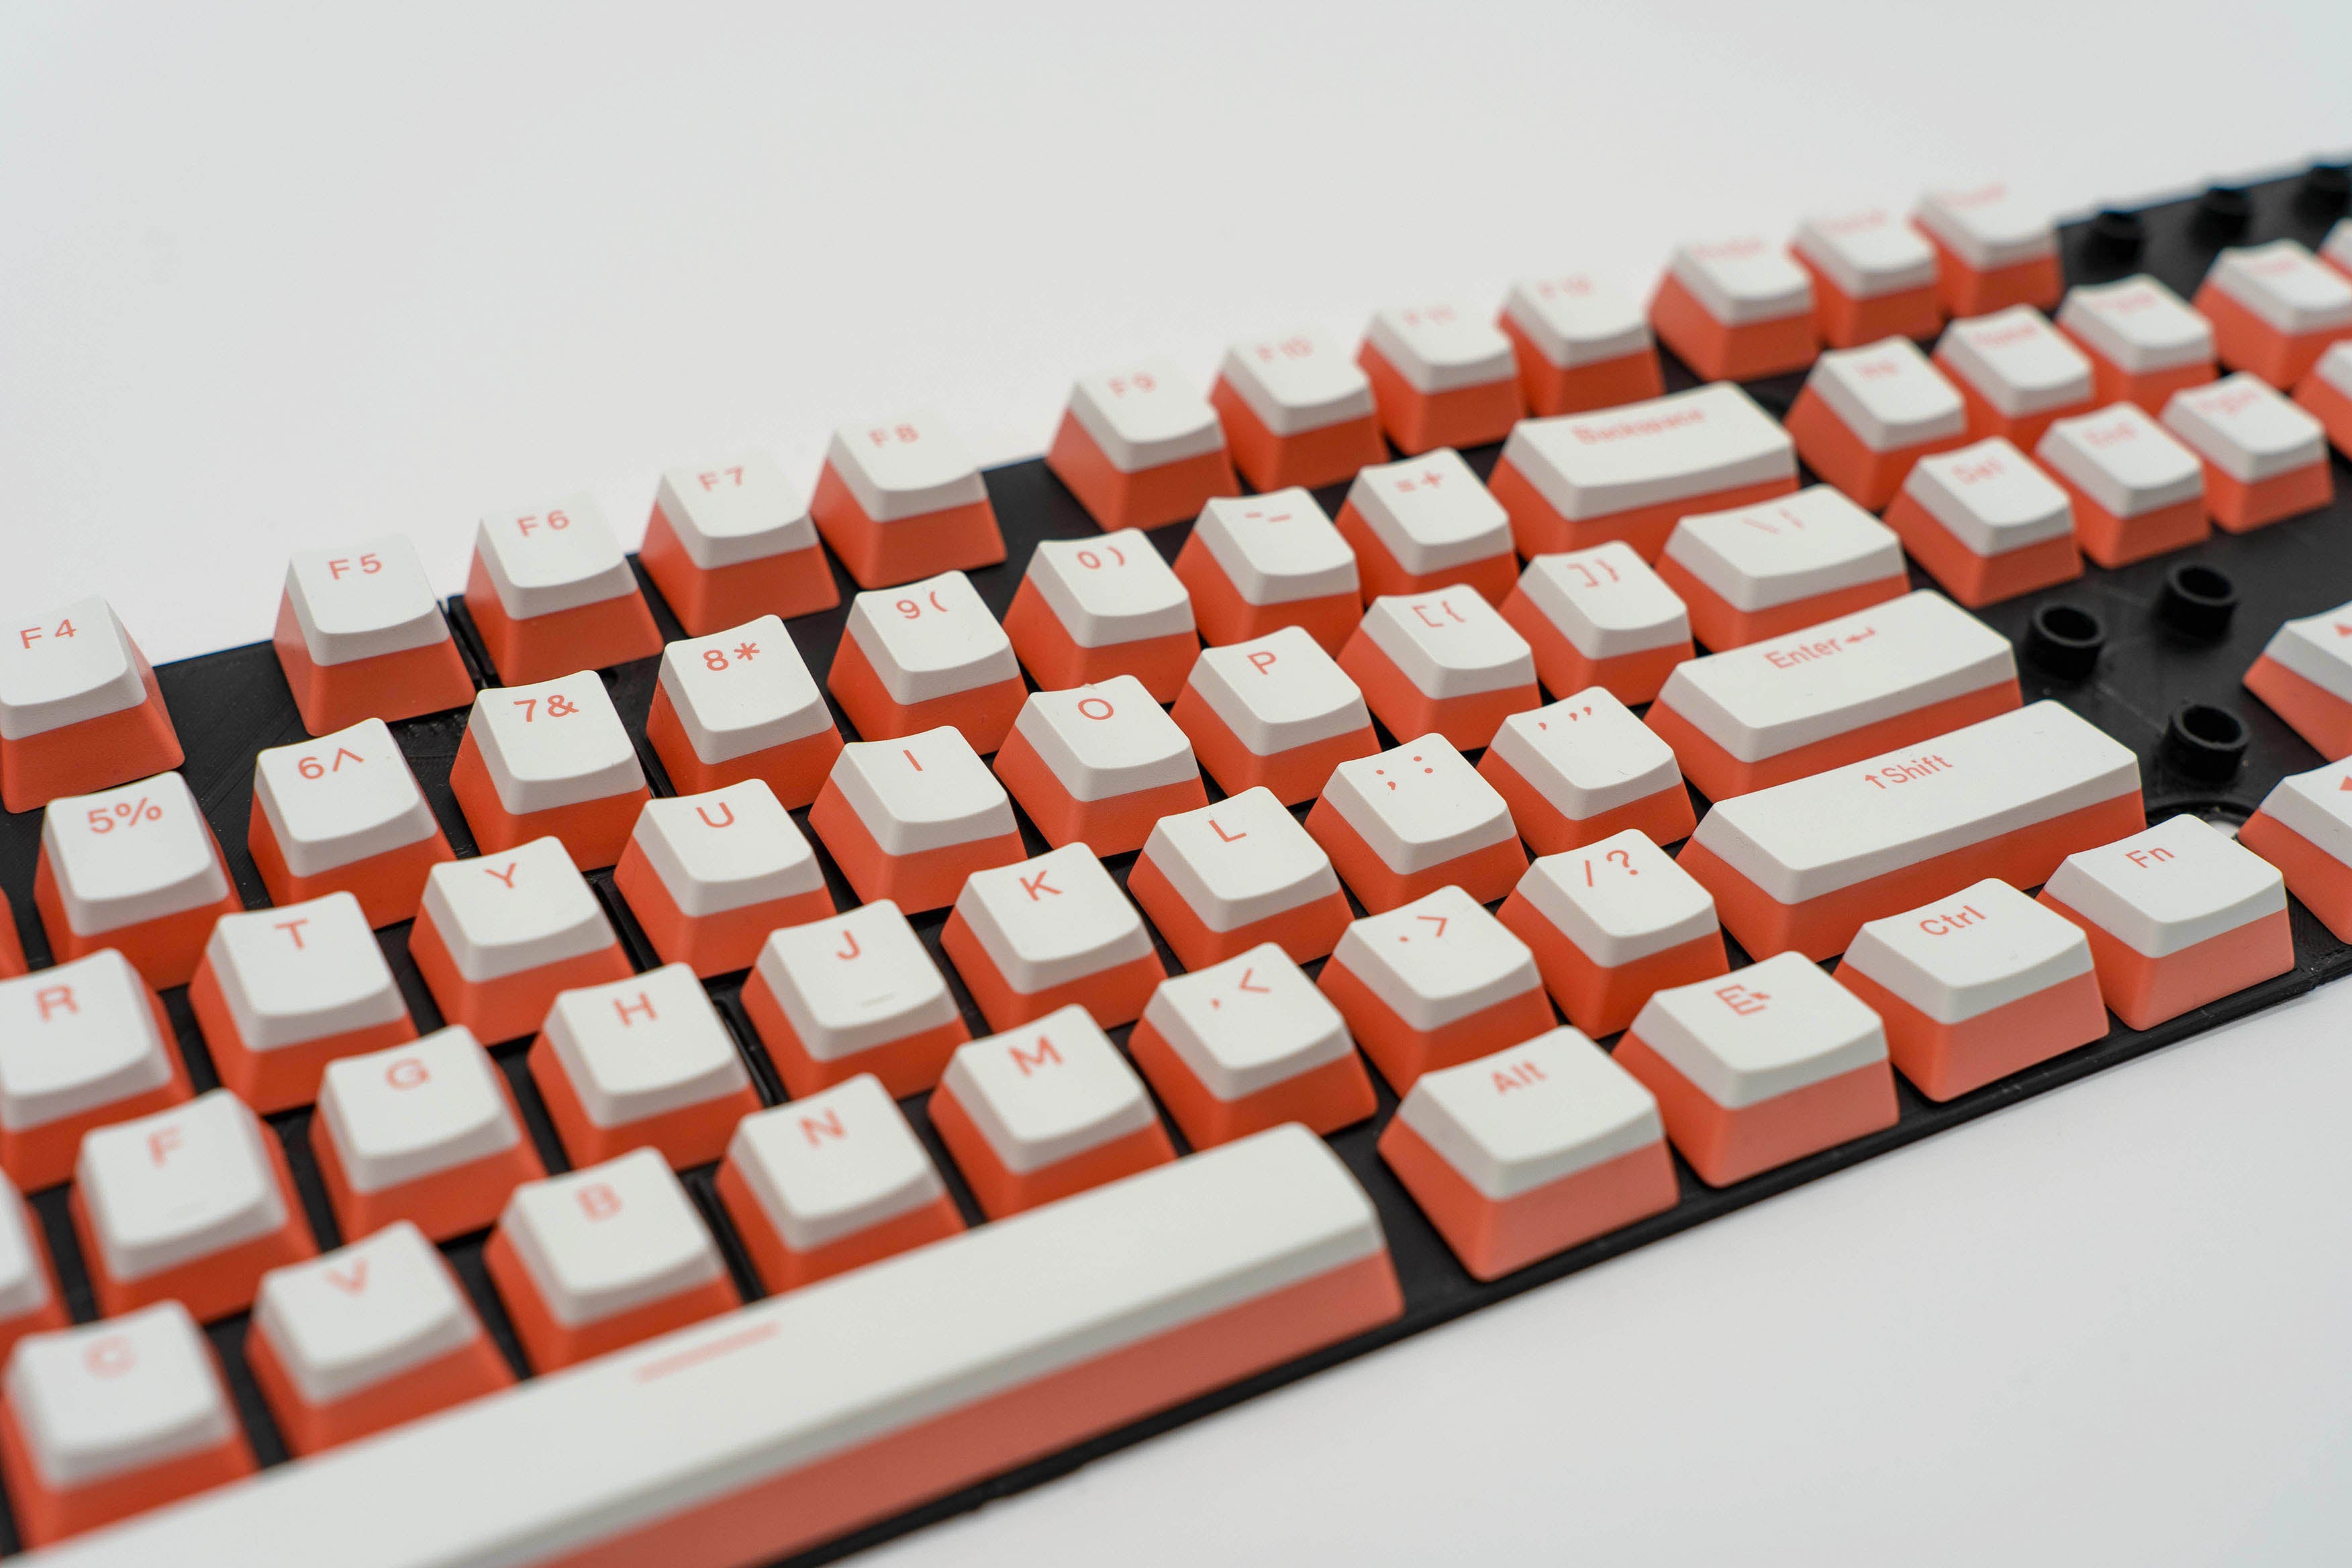 Peach Pudding Keycaps side view full set